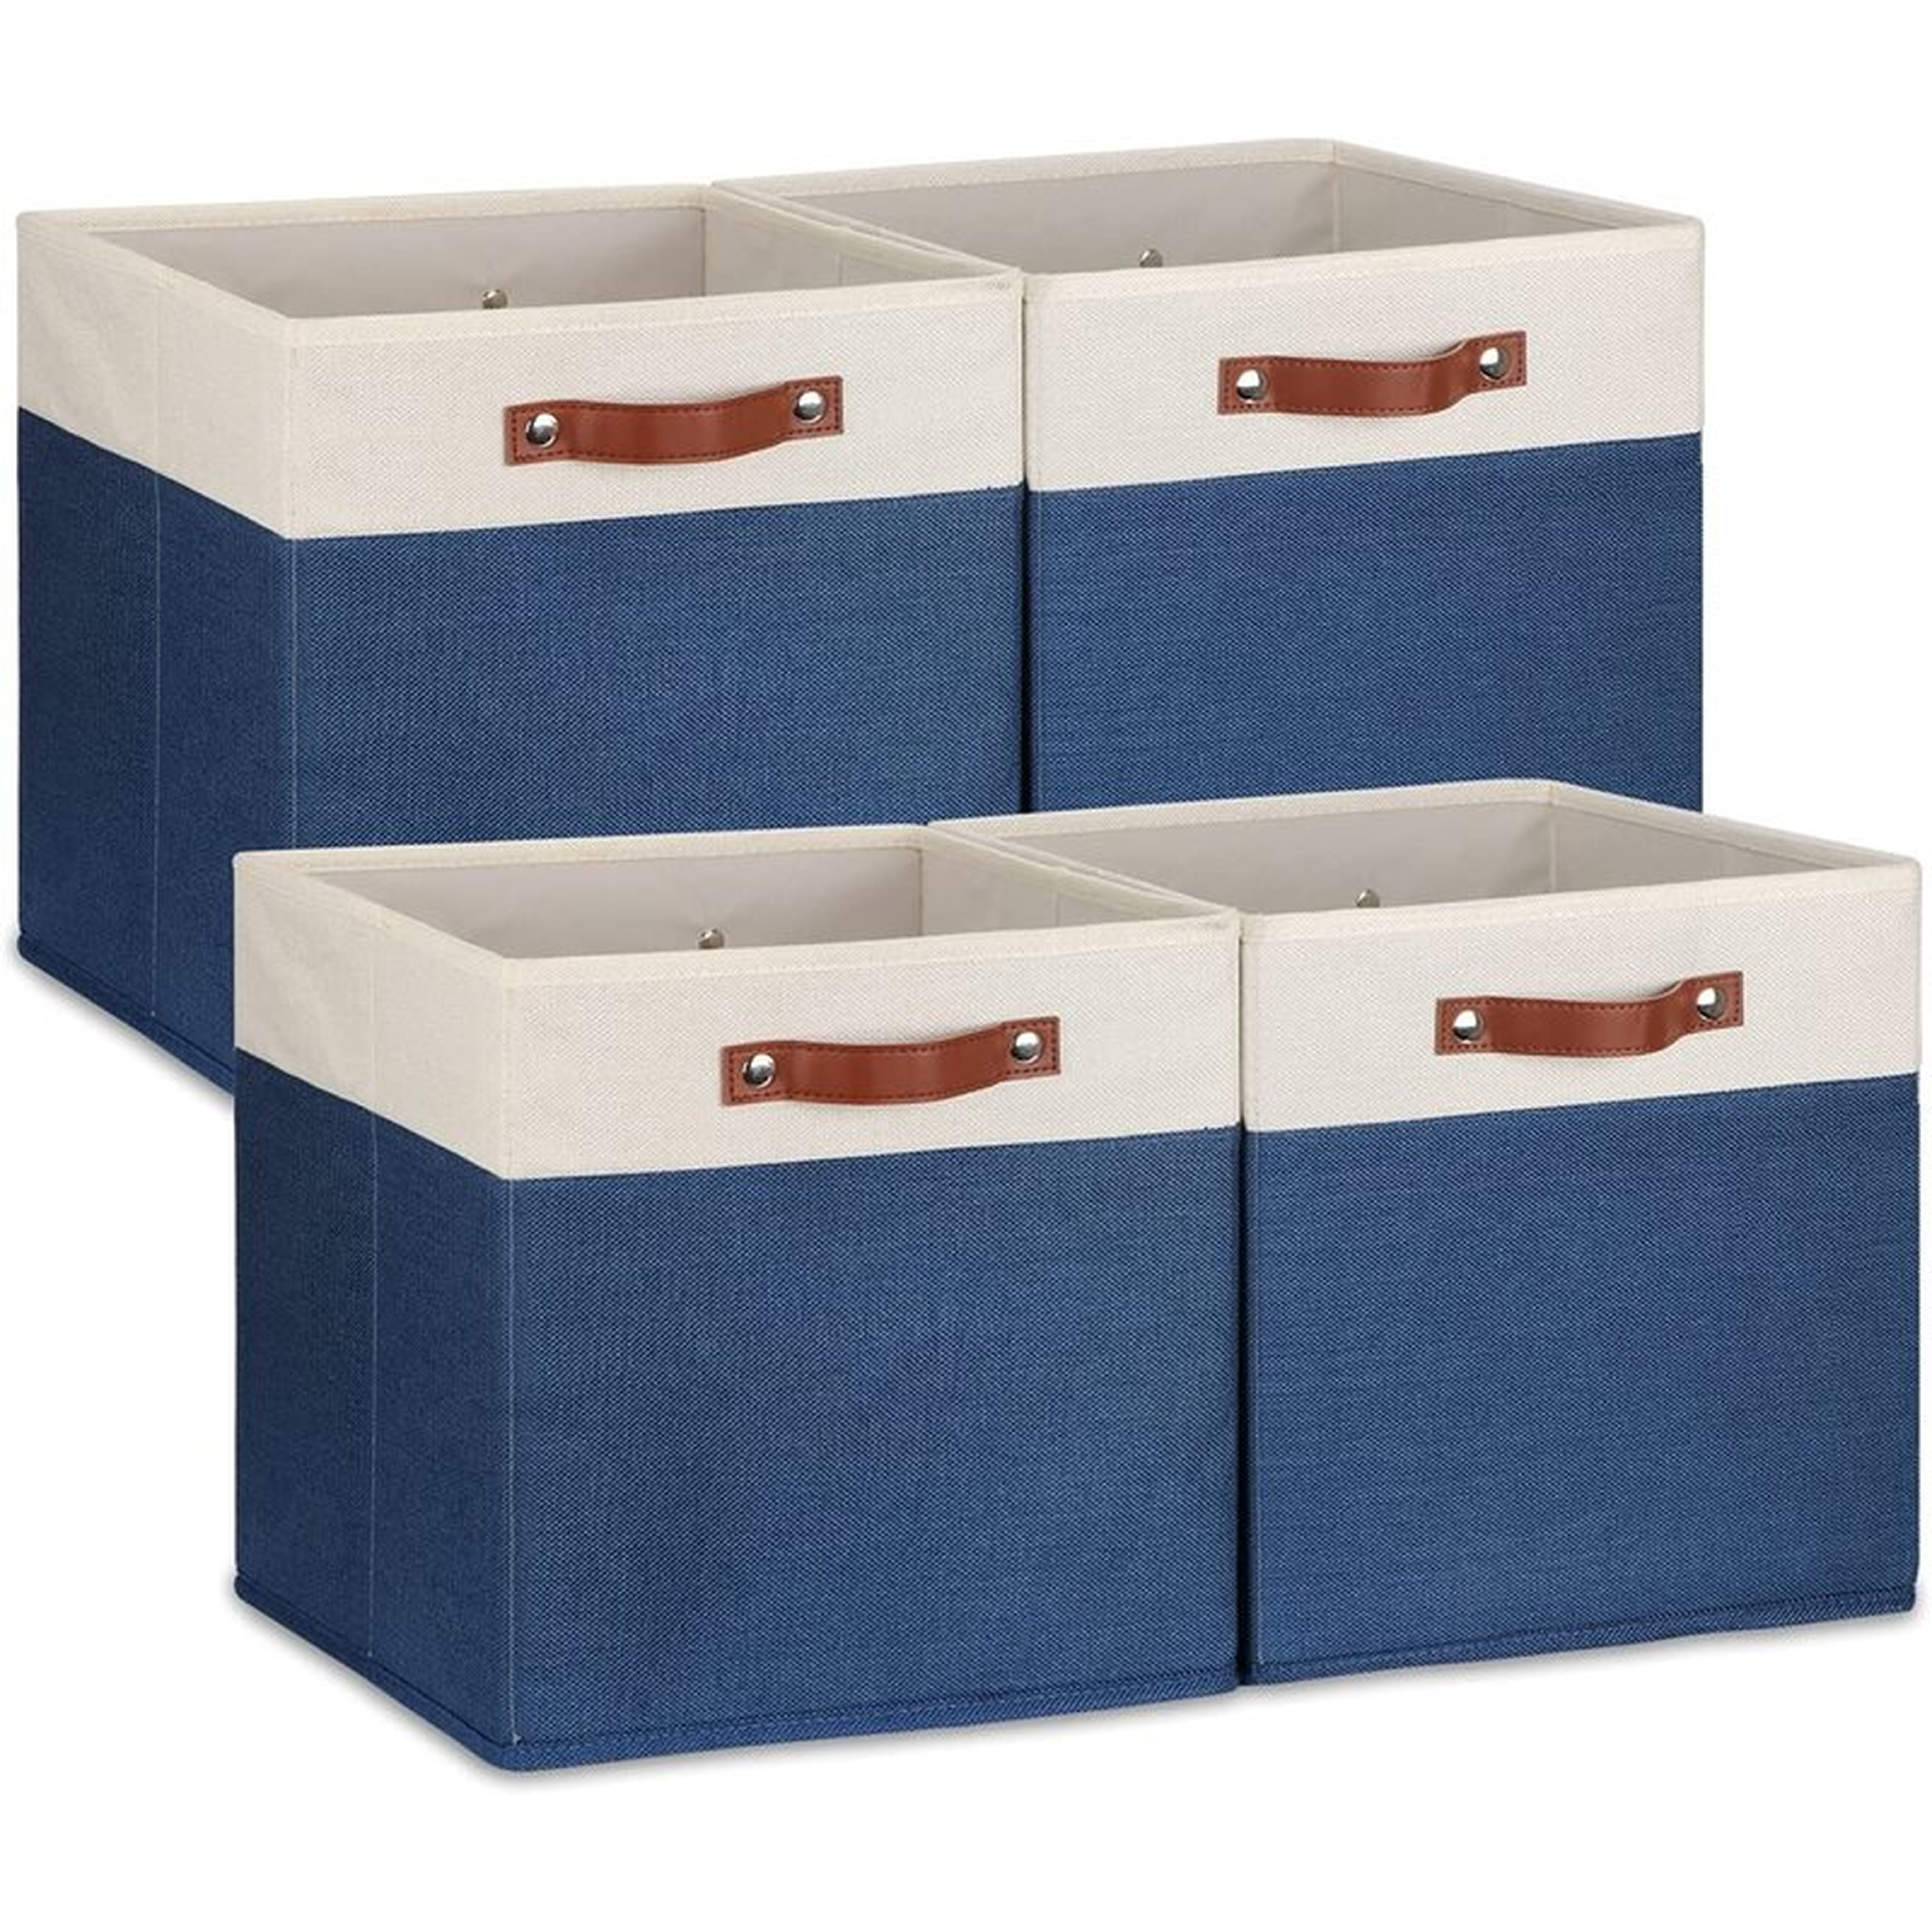 Fabric Storage Bins For Cube Organizer 4 Pack Cube Storage Bins Storage Cubes For Shelves Storage Baskets For Organizing Toys, Books, Clothes, Towels (Set of 4) - Wayfair